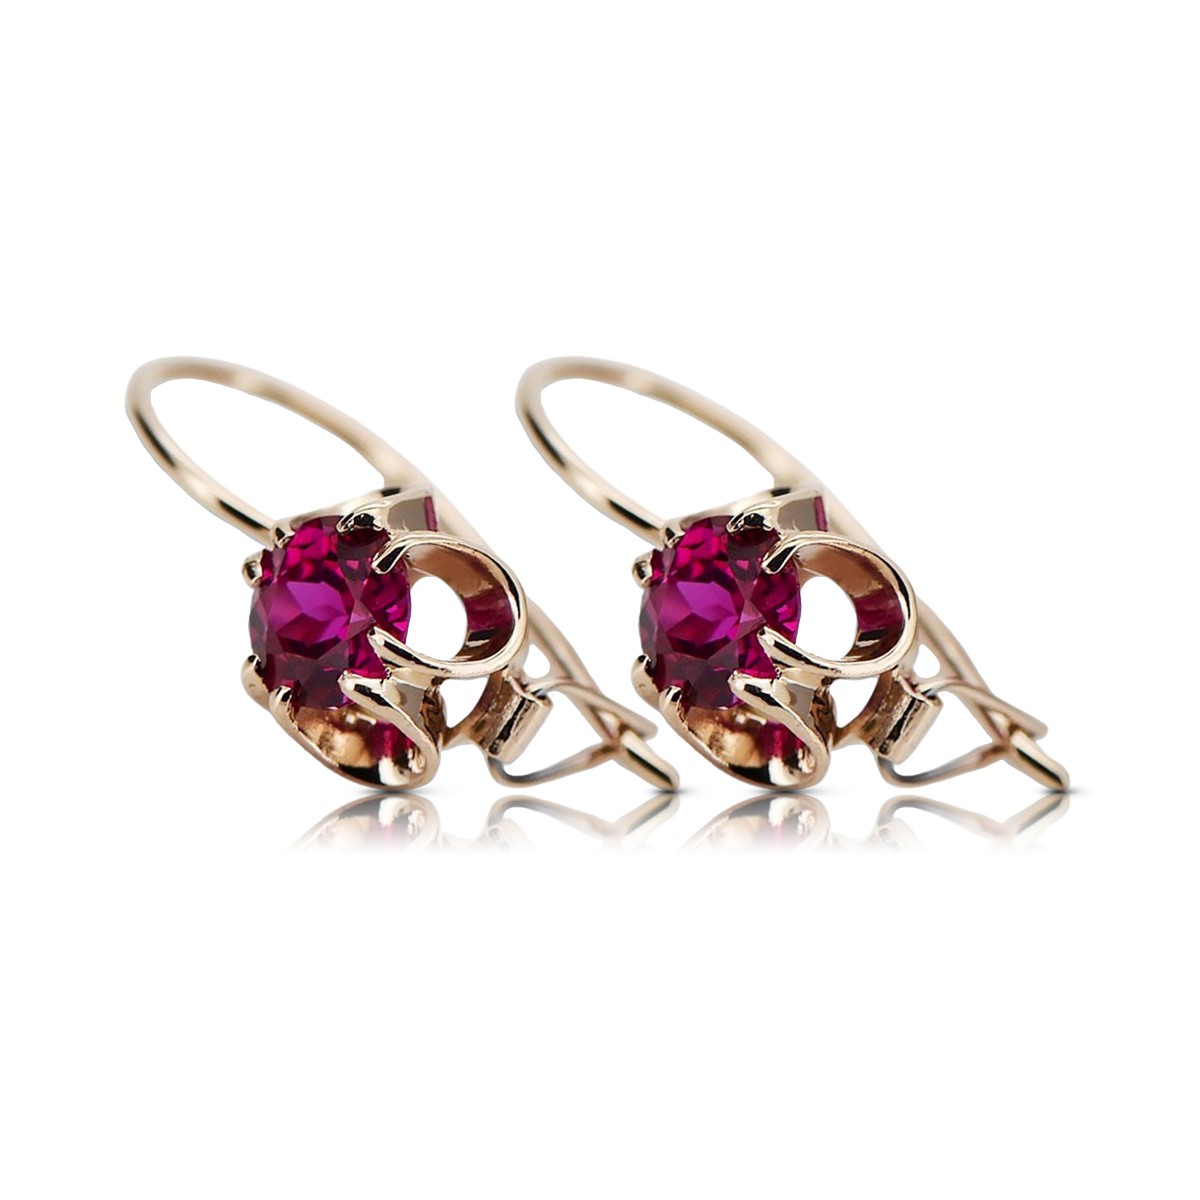 Silver rose gold plated 925 ruby earrings vec035rp Vintage